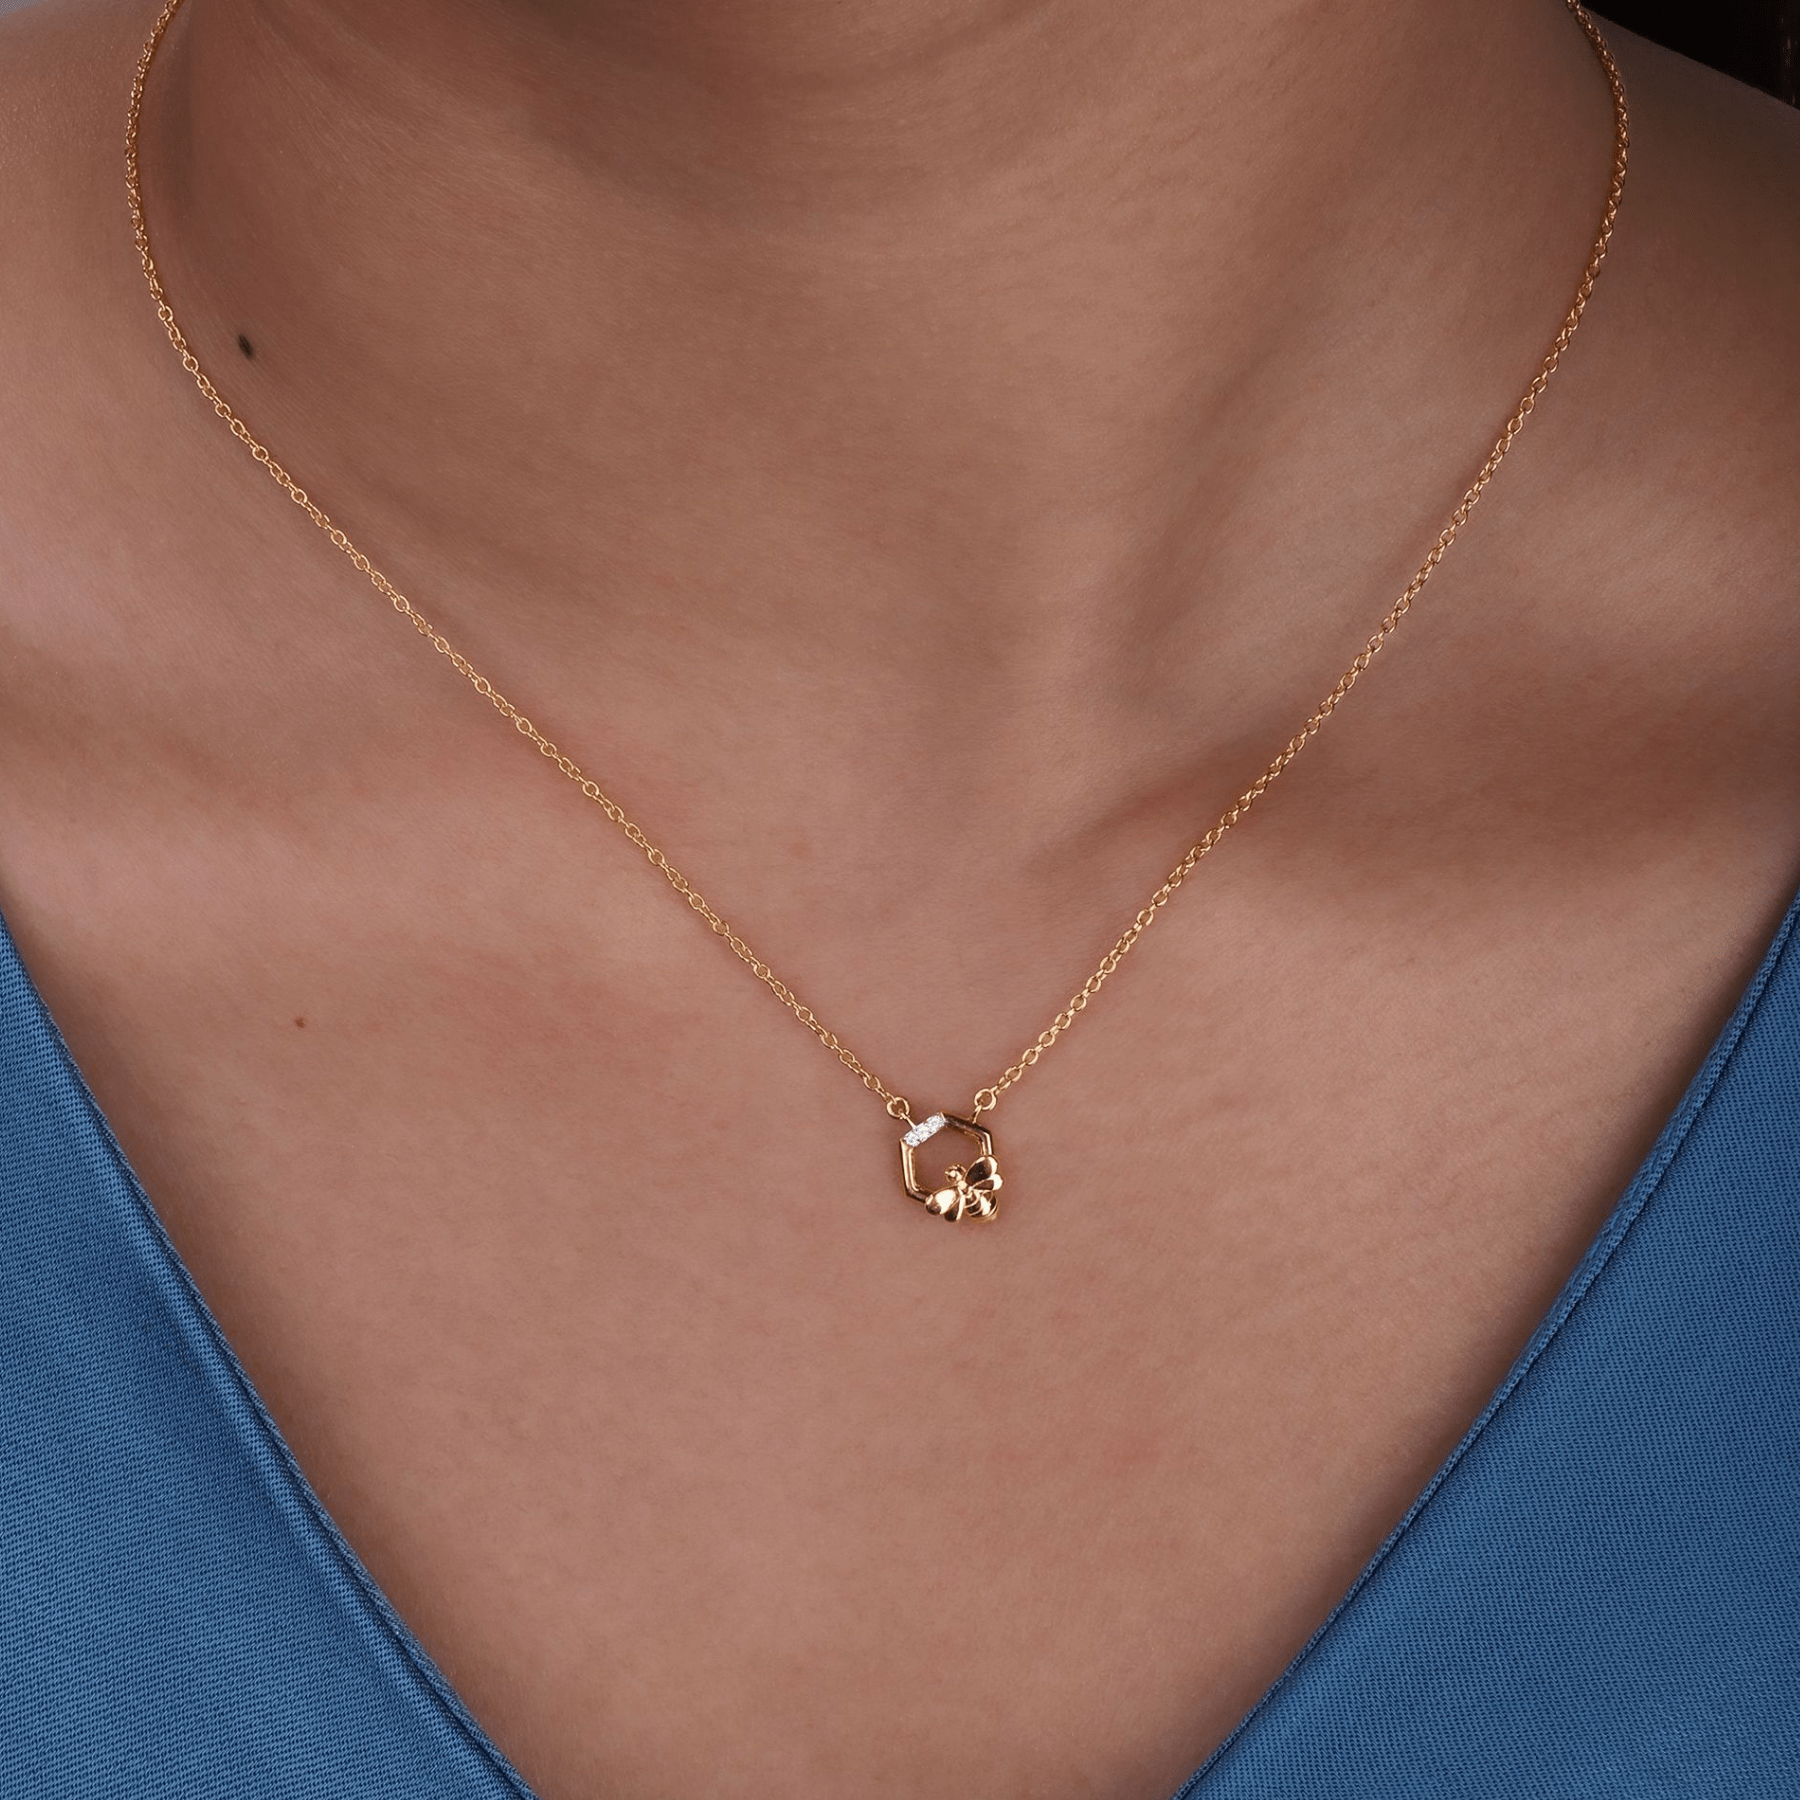 191N0240019 Honeycomb Inspired Hexagon Bee Necklace in 9ct Yellow Gold 4